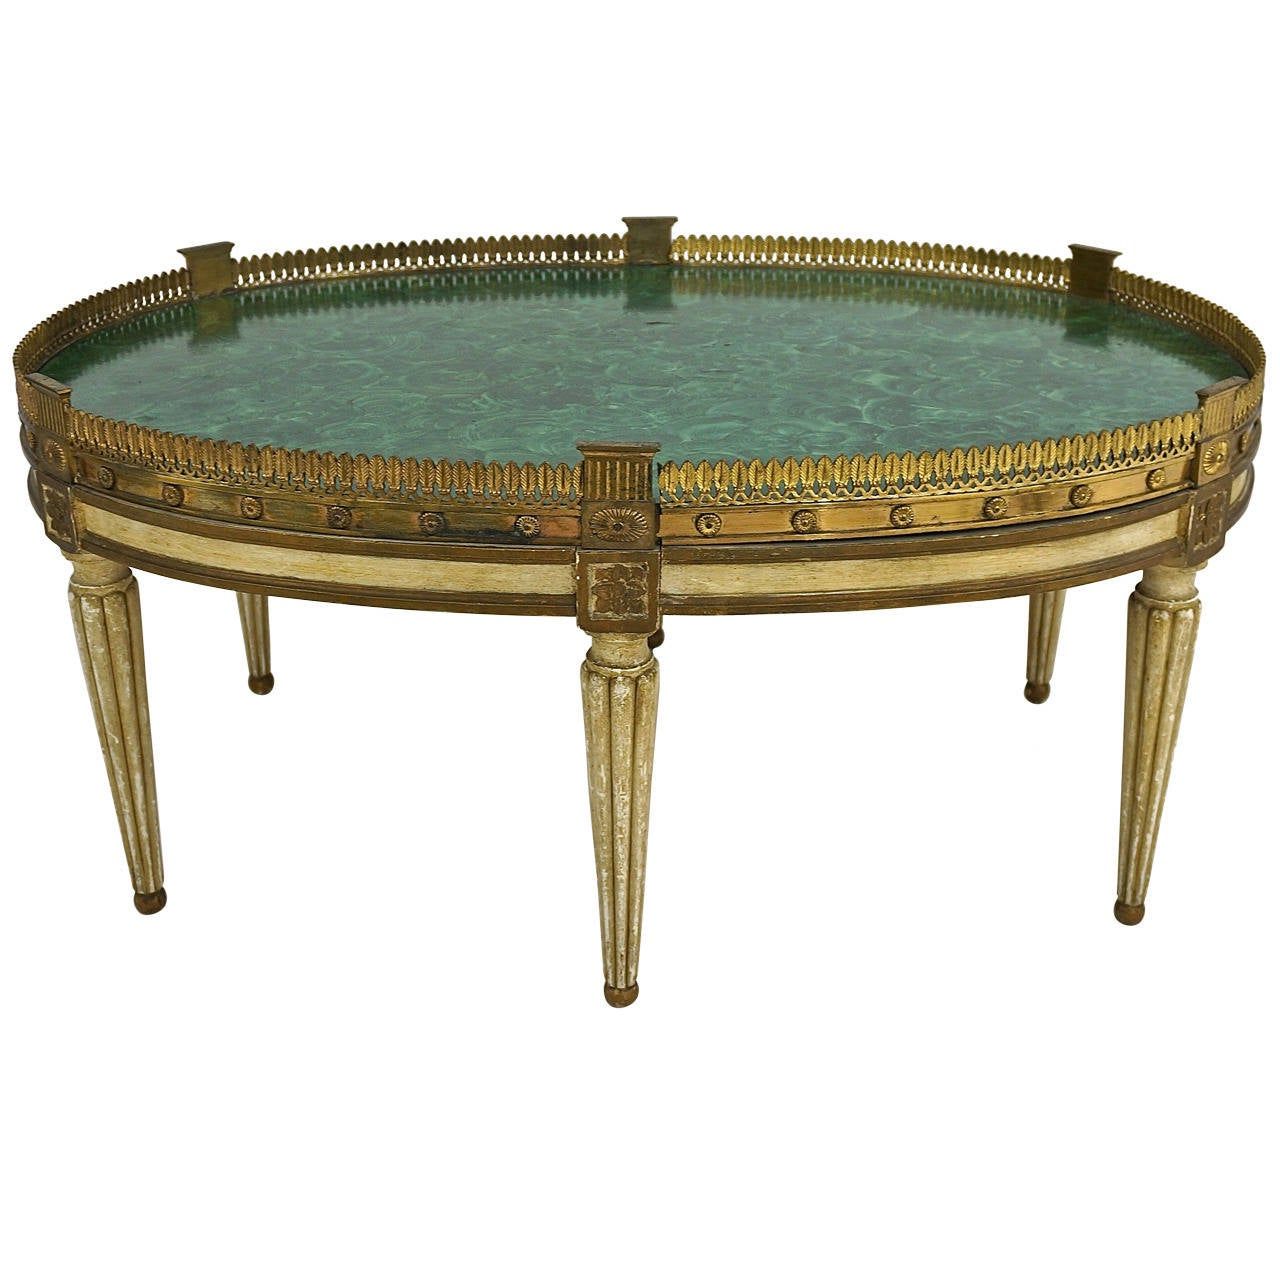 Louis Xvi Style Oval Painted Cocktail Table With Faux Pertaining To Most Up To Date Cream And Gold Coffee Tables (View 12 of 20)